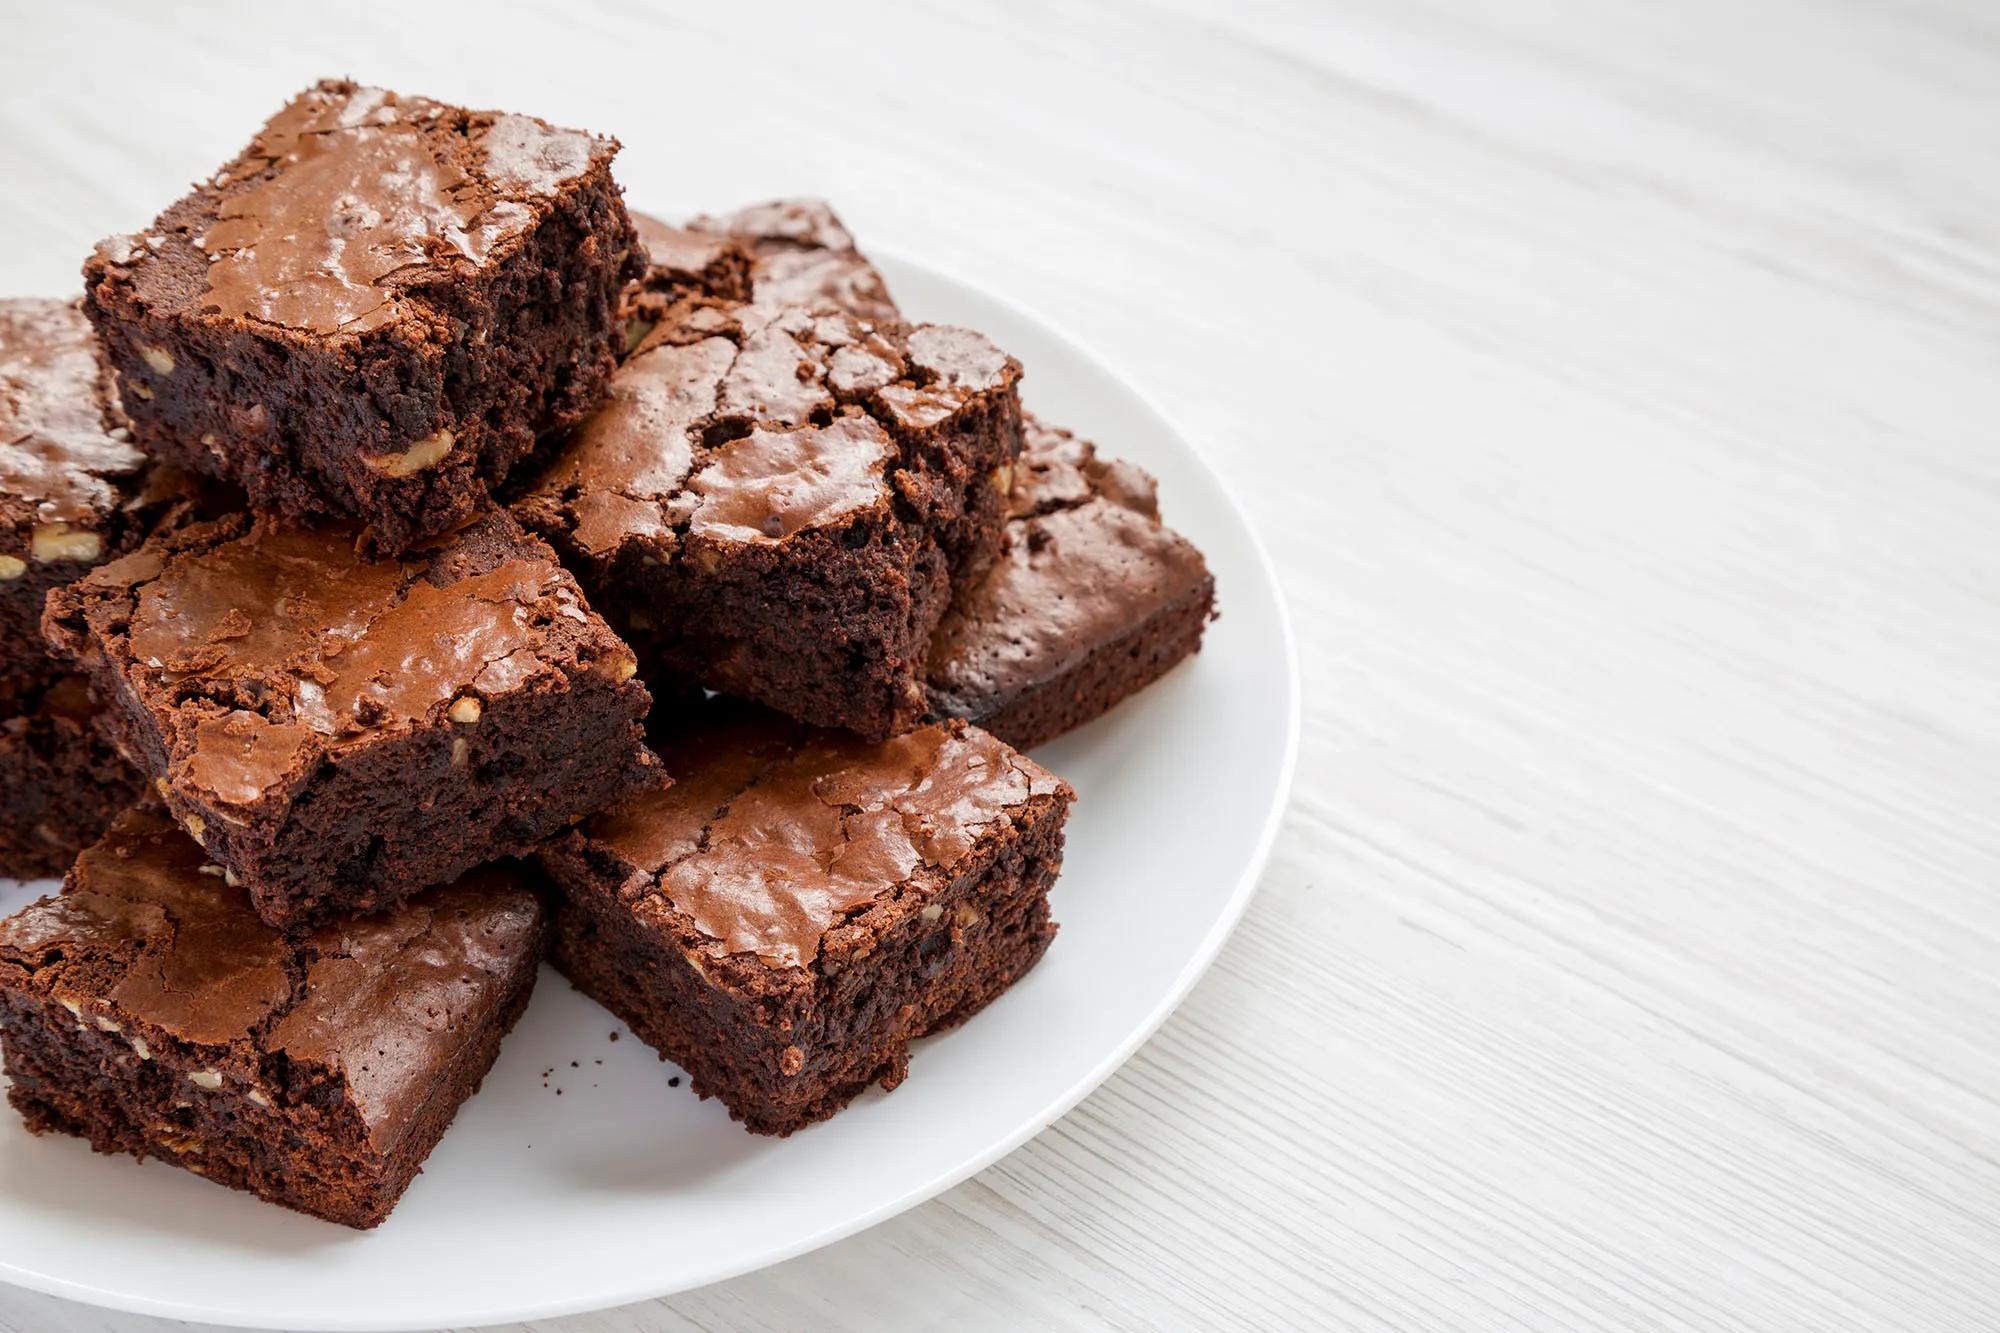 Celebrate 4/20 with this historic pot brownie recipe